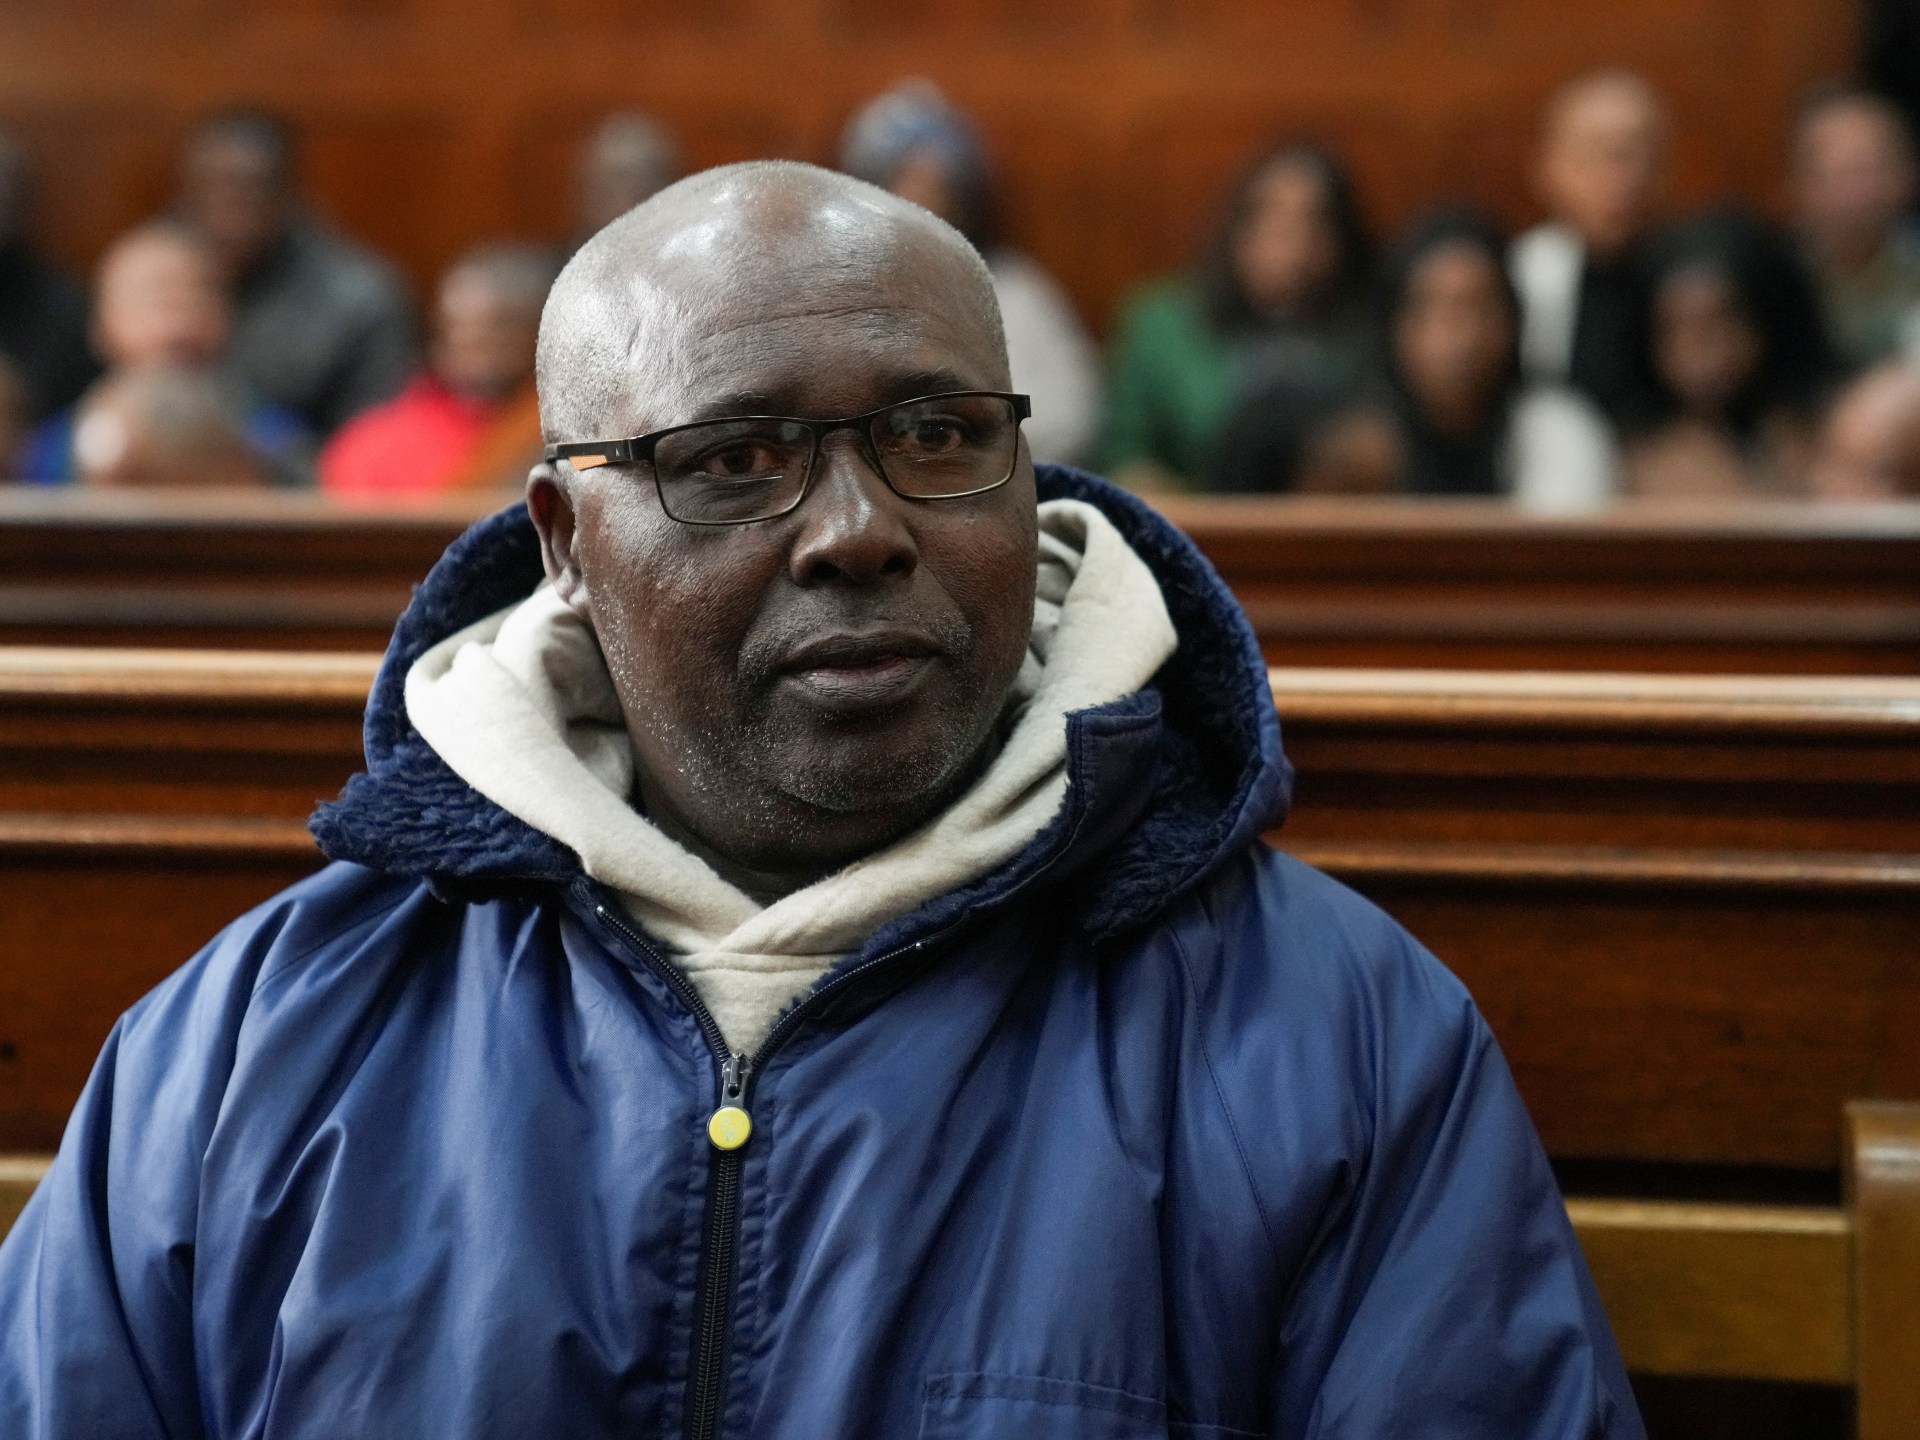 rwandan-genocide-suspect-faces-more-charges-in-south-africa